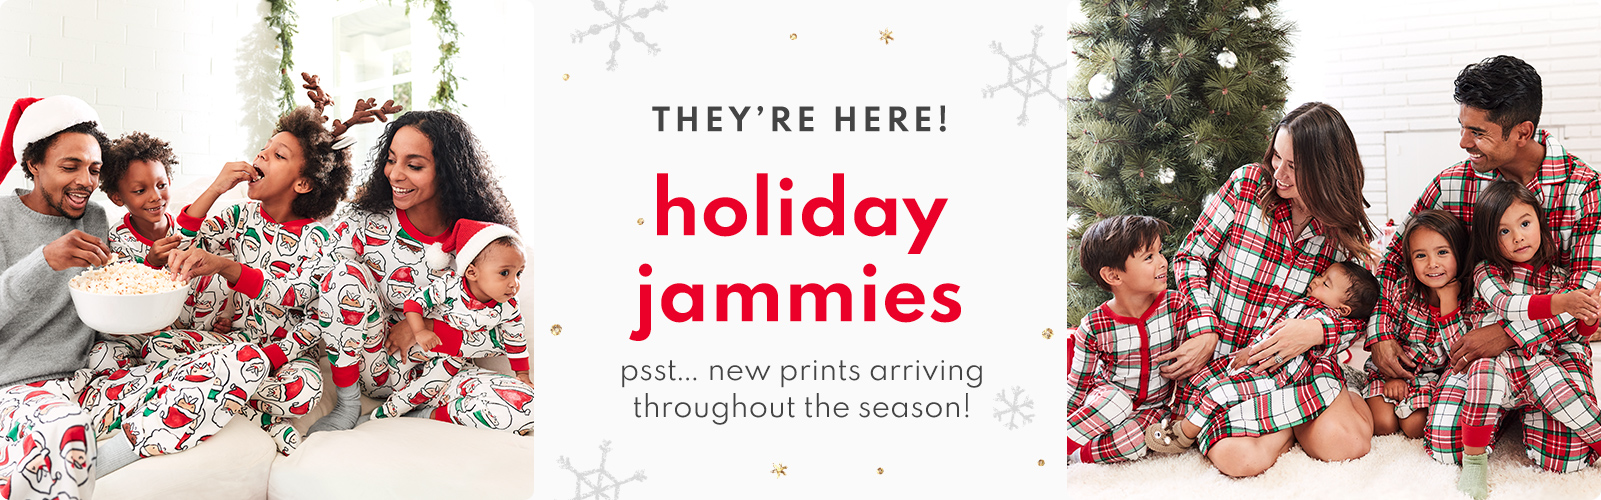 THEY'RE HERE! | holiday jammies | psst... new prints arriving throughout the season!